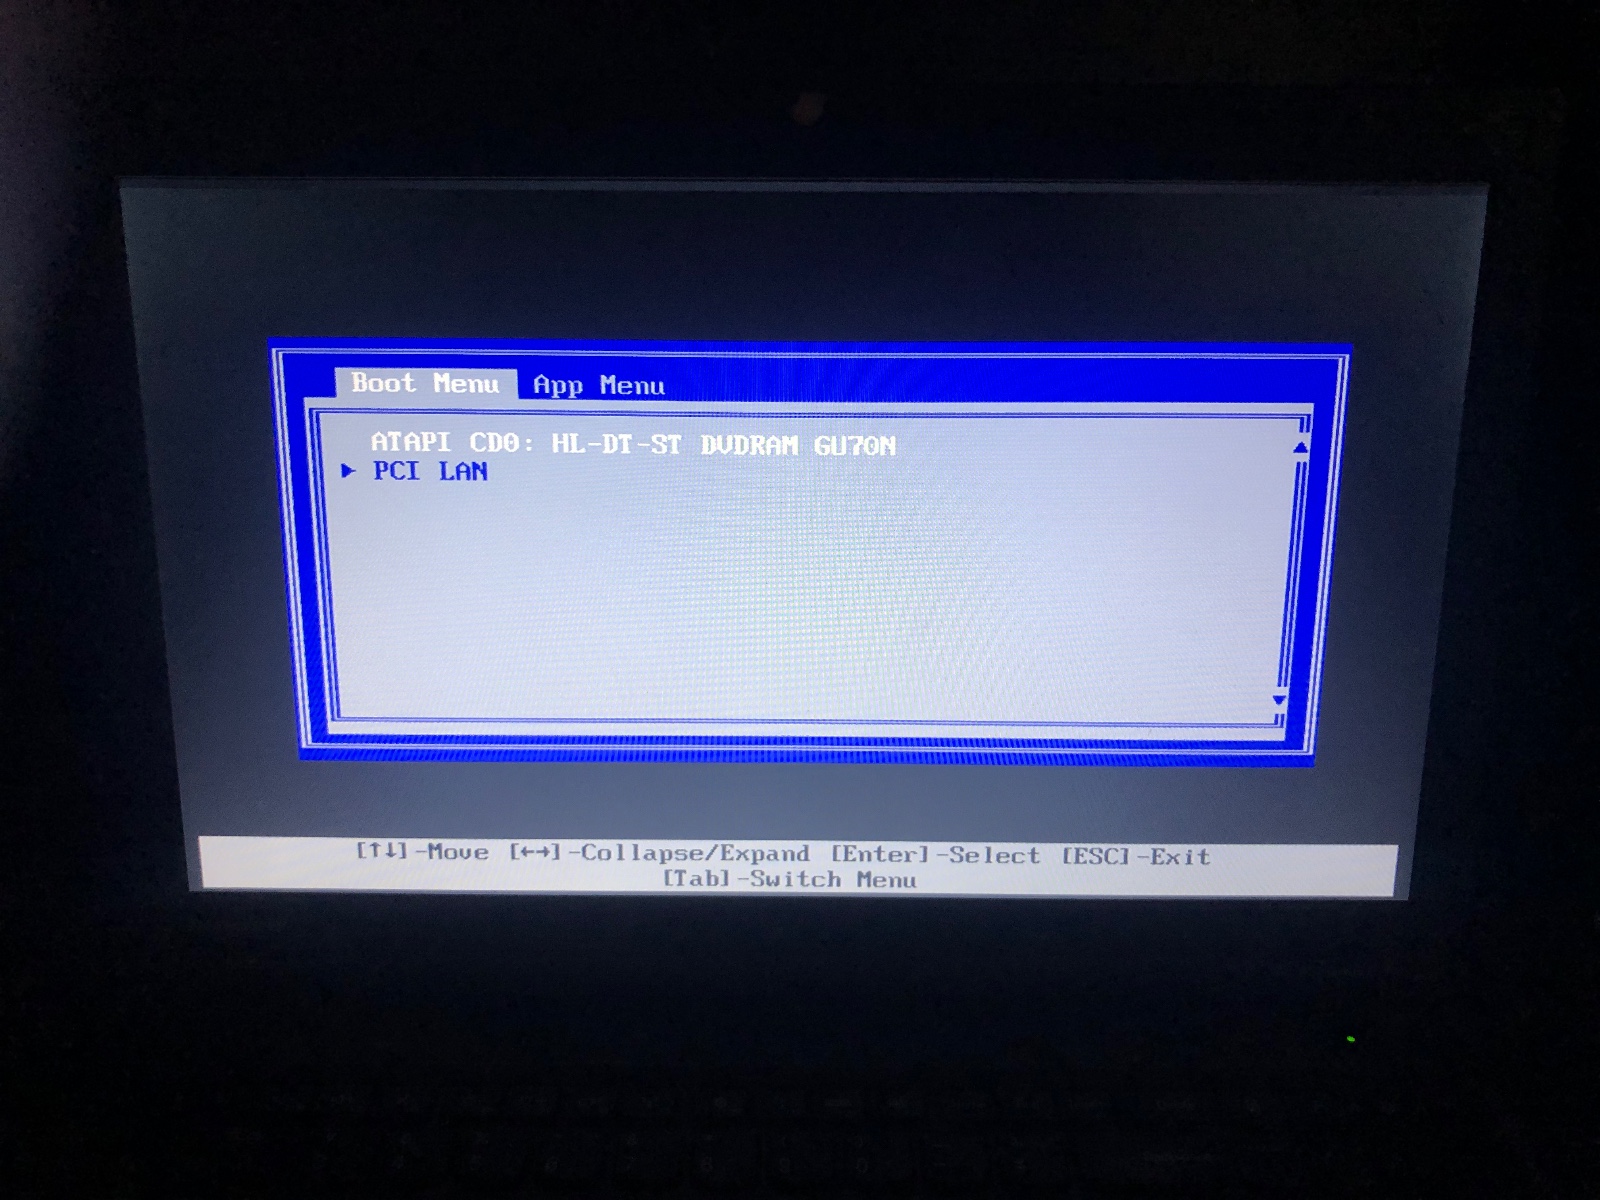 HELP-I-am-stuck-in-boot-menu-and-it-won-t-let-me-pick-a-drive-to-boot-from  - English Community - LENOVO COMMUNITY